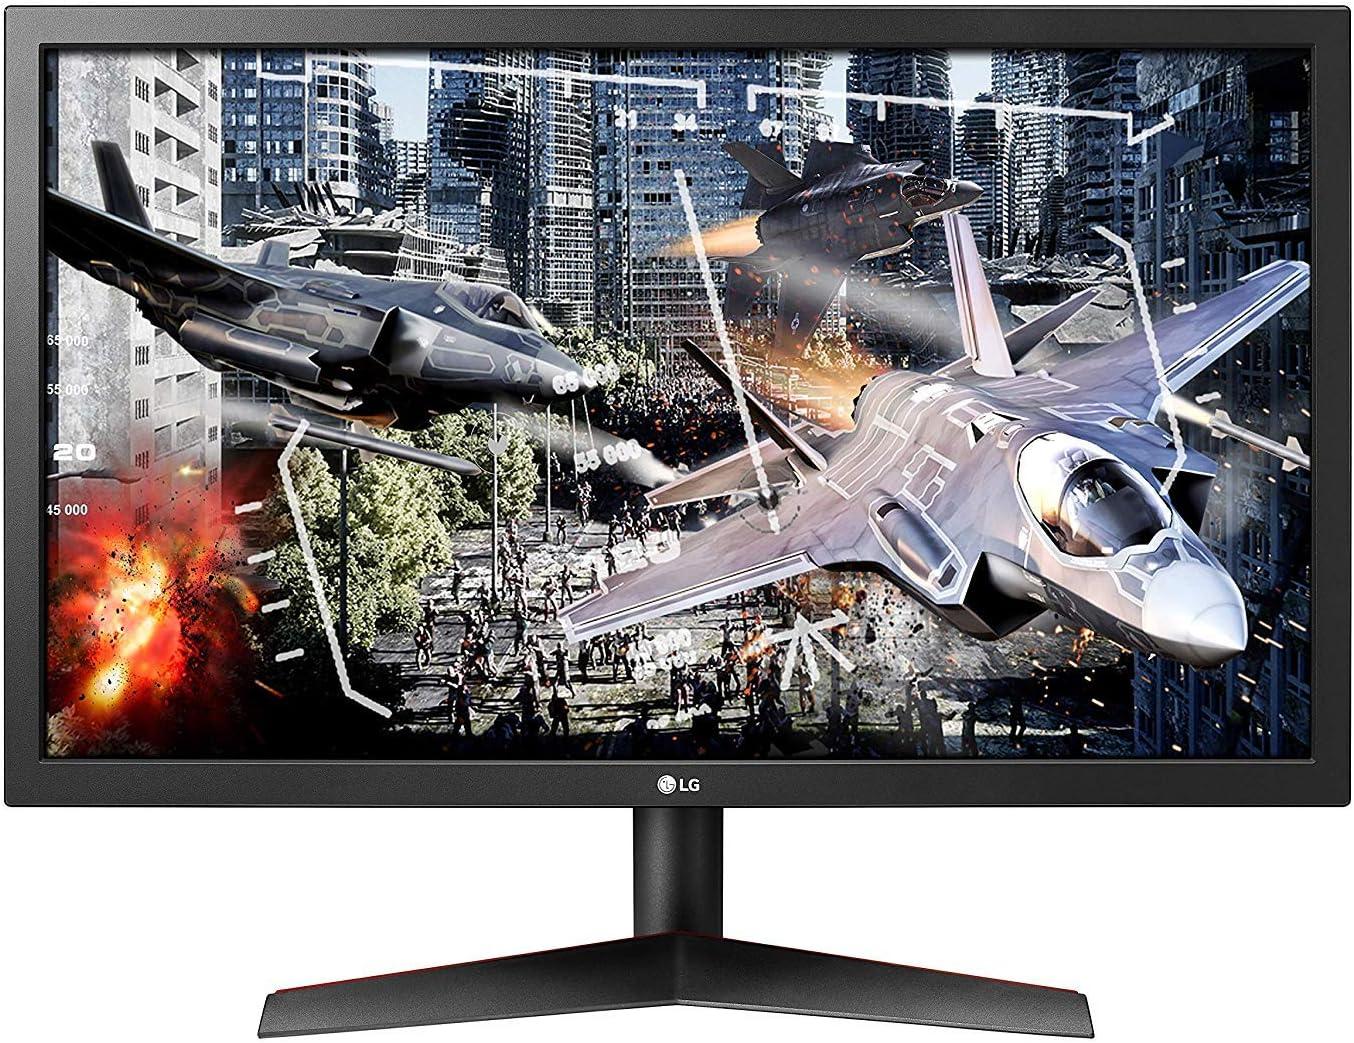 24in LG UltraGear FHD 144Hz 1ms Gaming Monitor for $69.99 Shipped